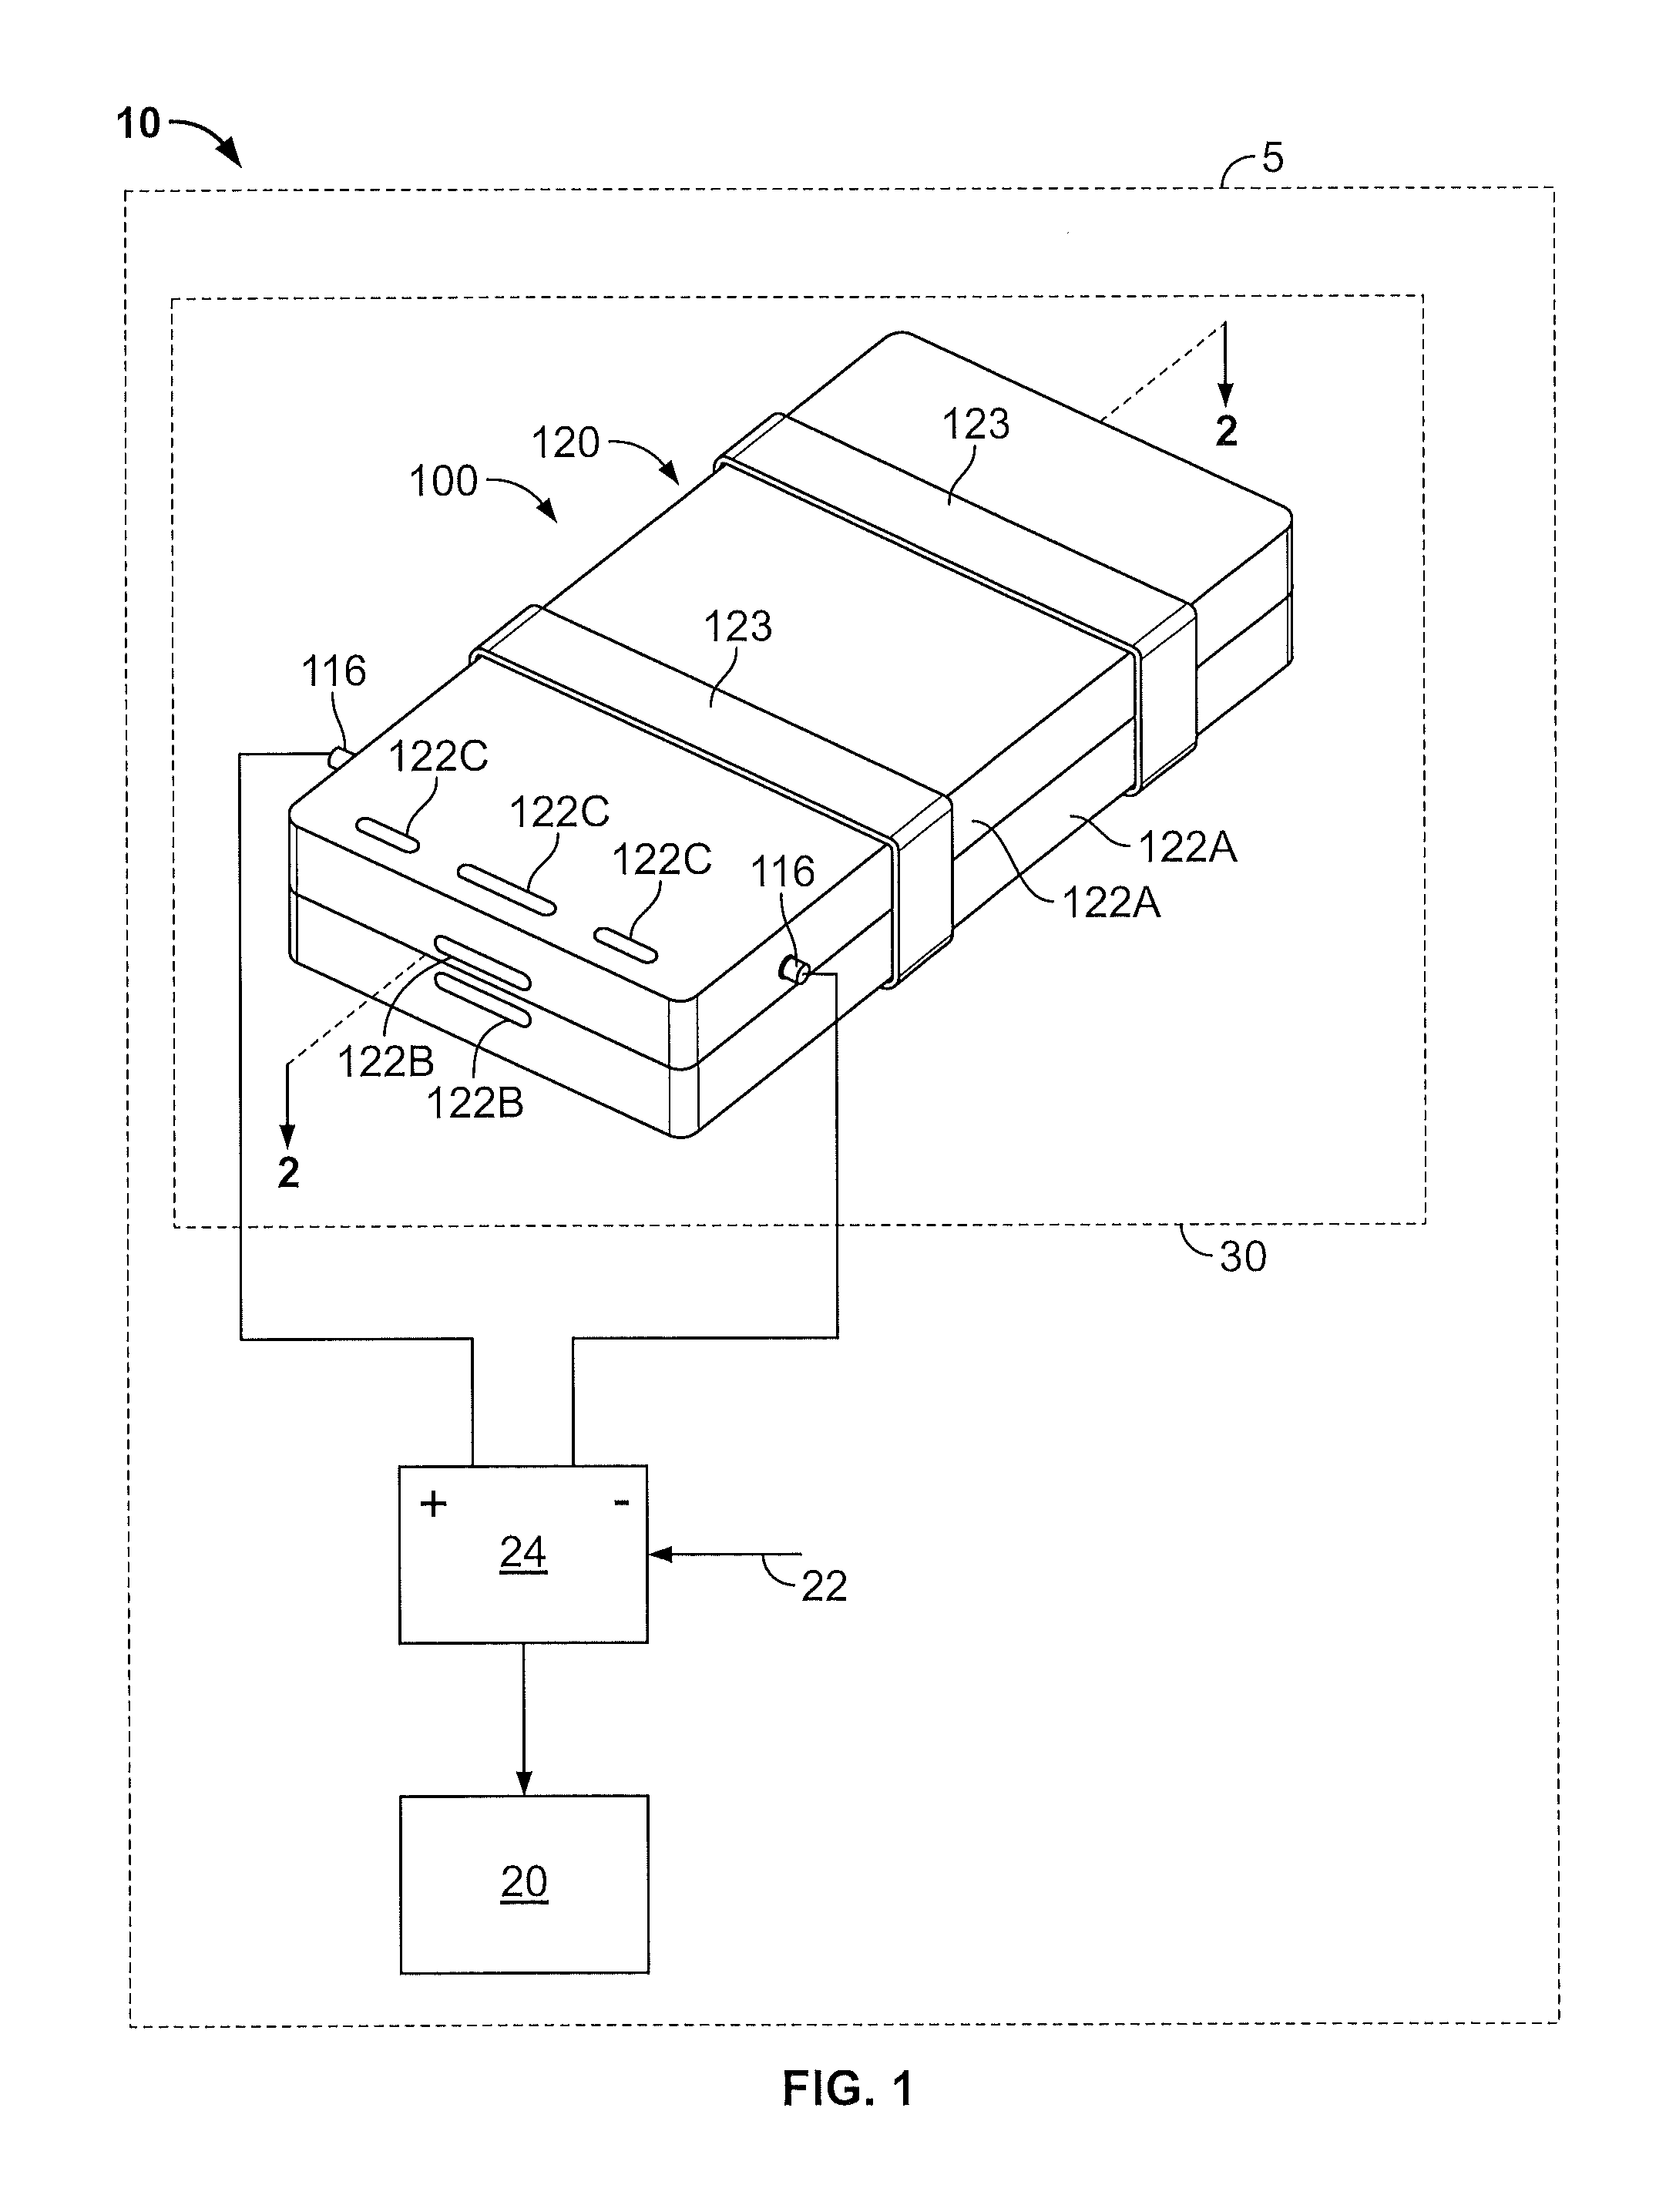 Temperature controlled battery pack assembly and methods for using the same